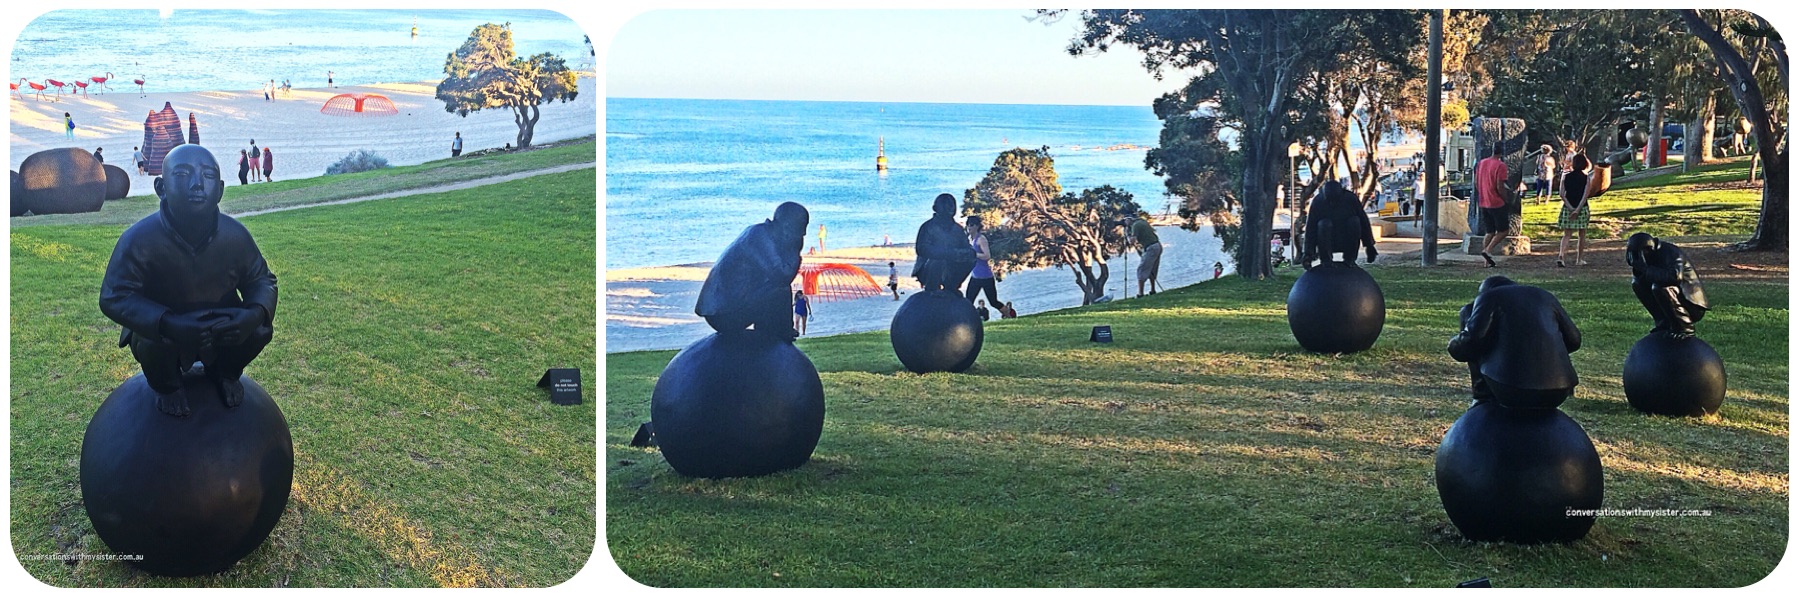 There are 70 local, interstate and international artists presenting their work in this ‘sculpture park’ at Cottesloe Beach in WA which, according to the Sculptures By The Sea website, makes this “one of the world’s largest free to the public events”. Here are the 16 sculptures by the sea which had the biggest impact on me - may they bring colour, awe and happiness into your day…